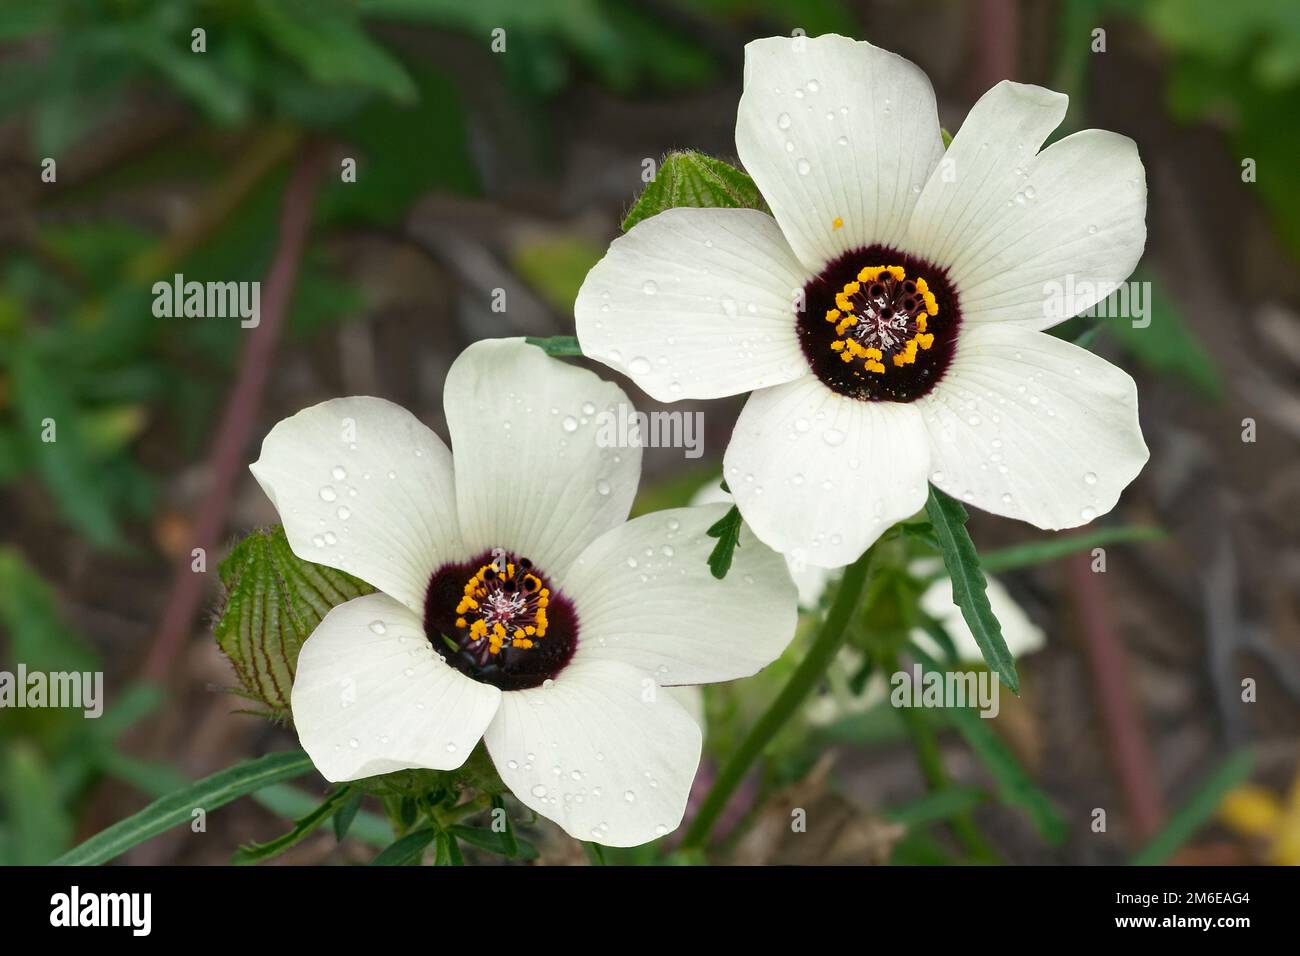 Close-up image of Flower-of-an-hour flowers Stock Photo